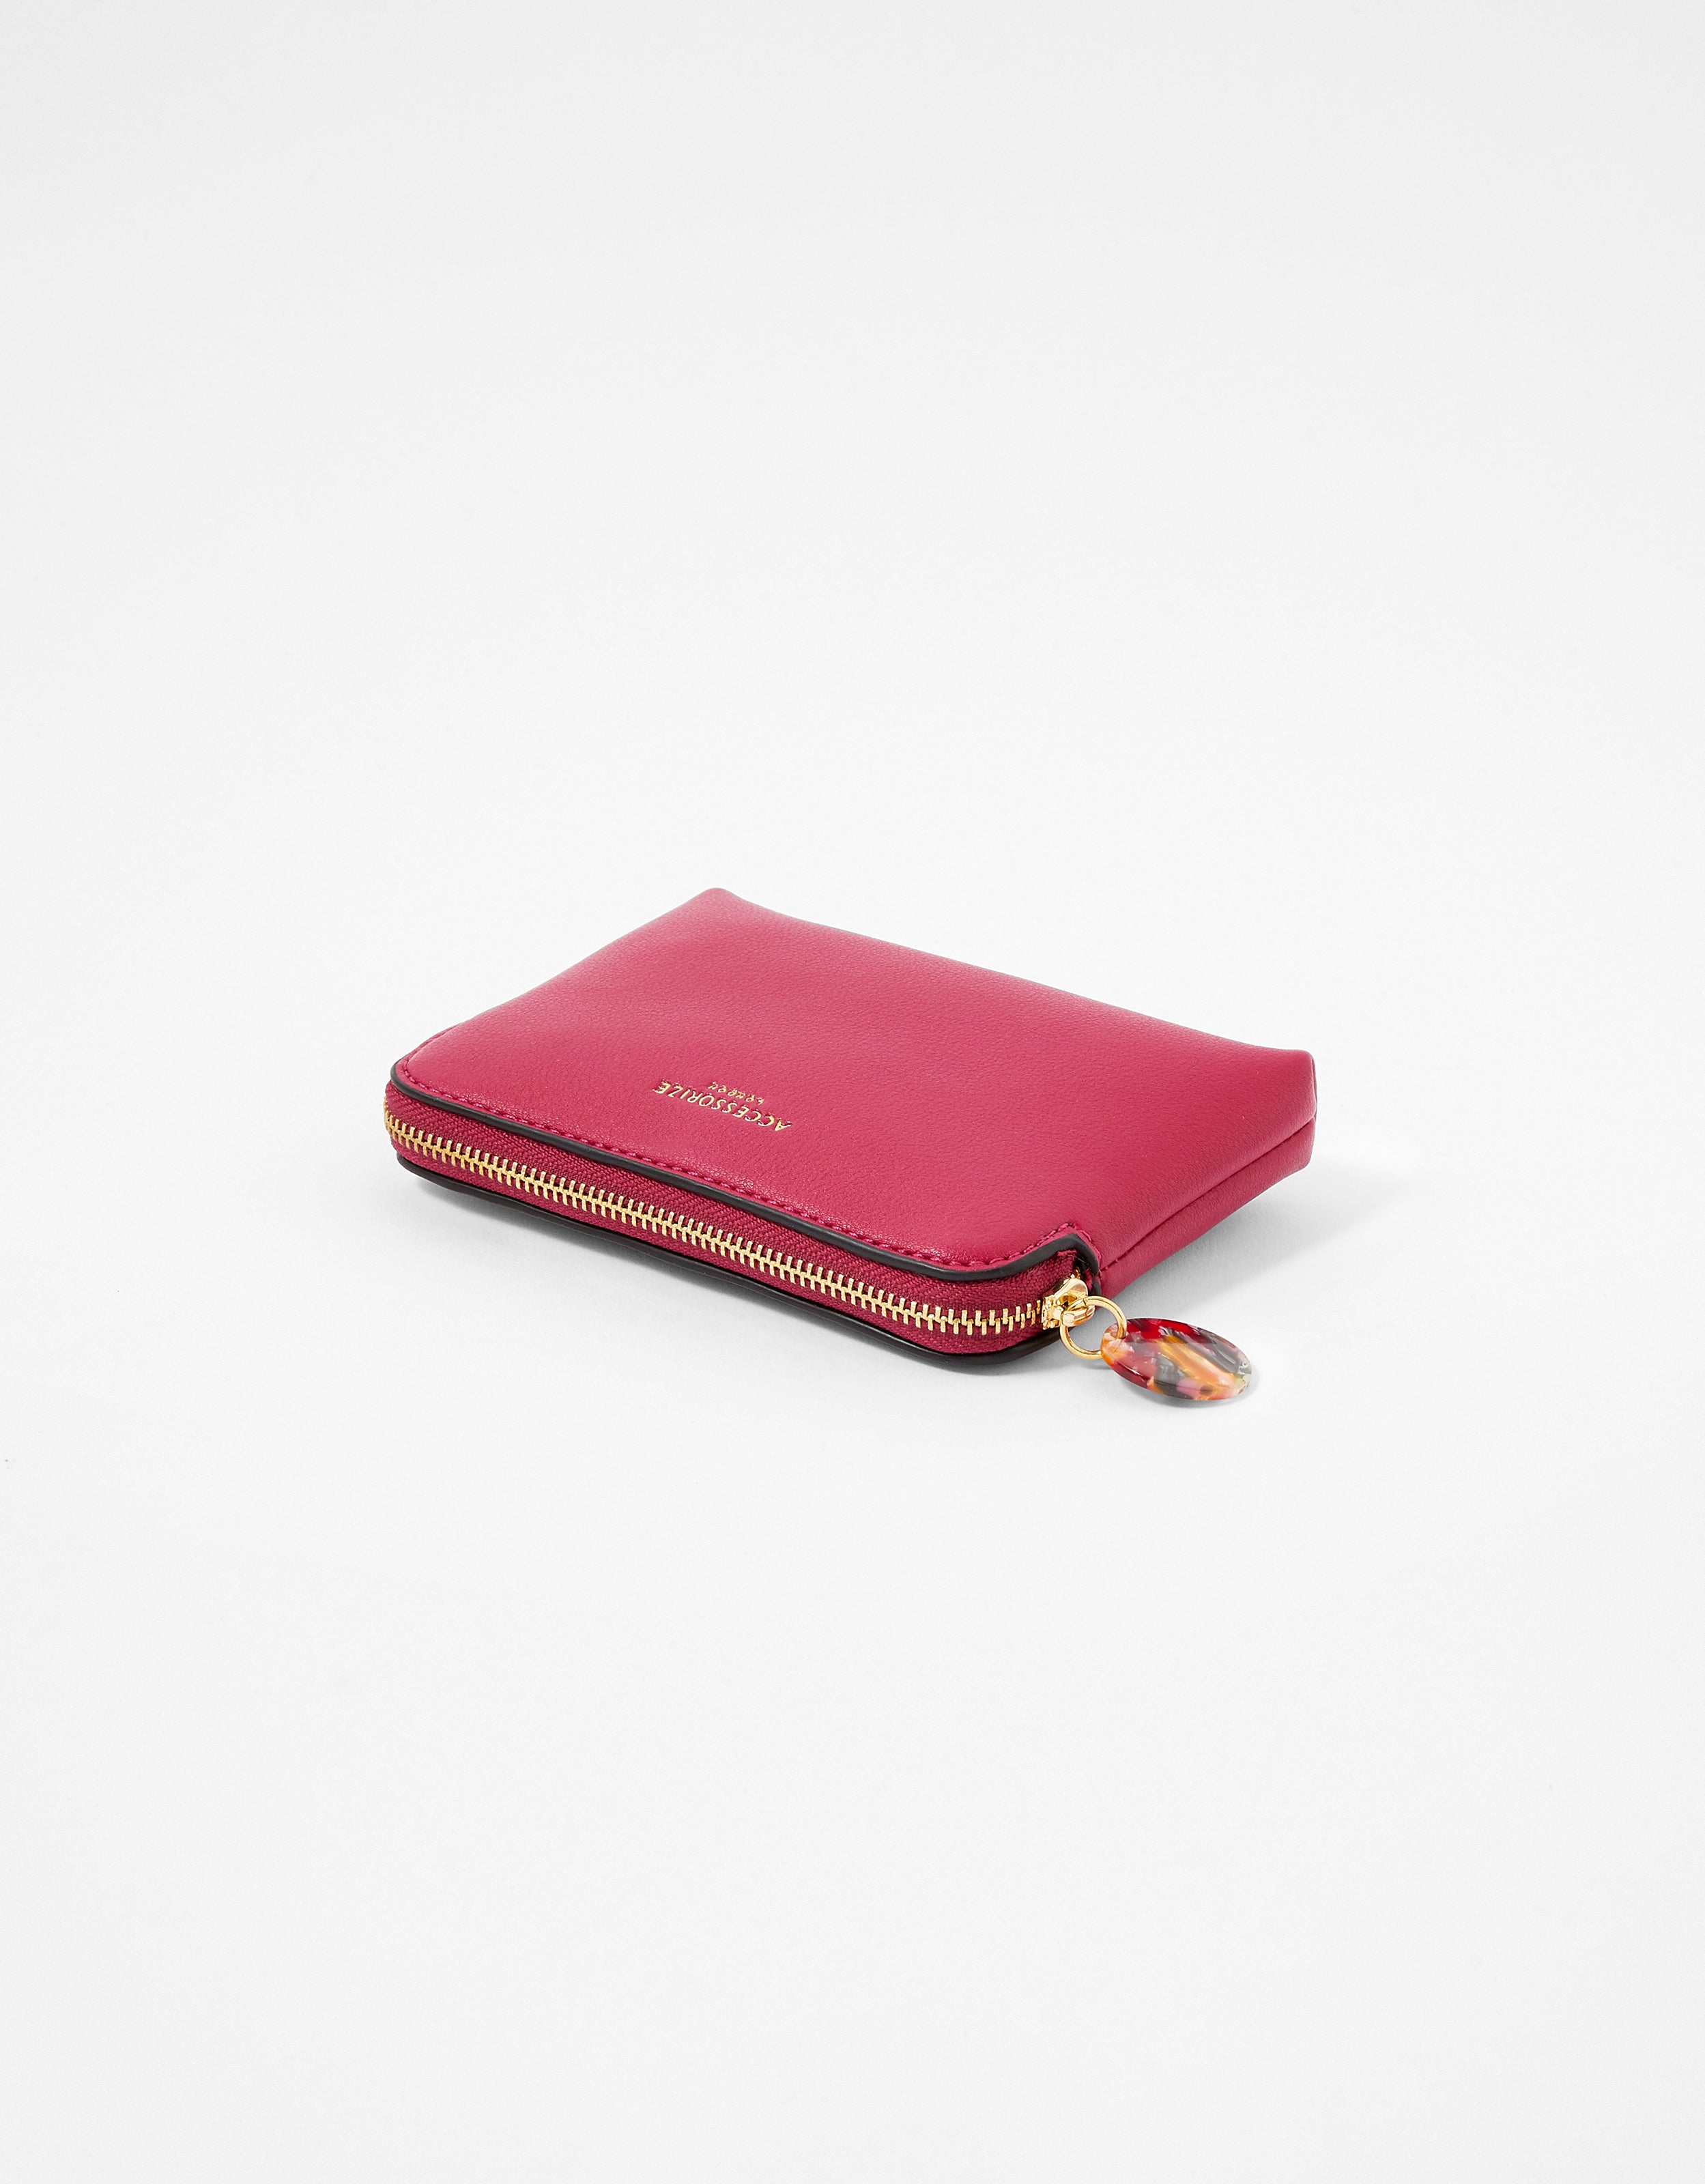 Heart-shaped leather coin purse in red - Jil Sander | Mytheresa